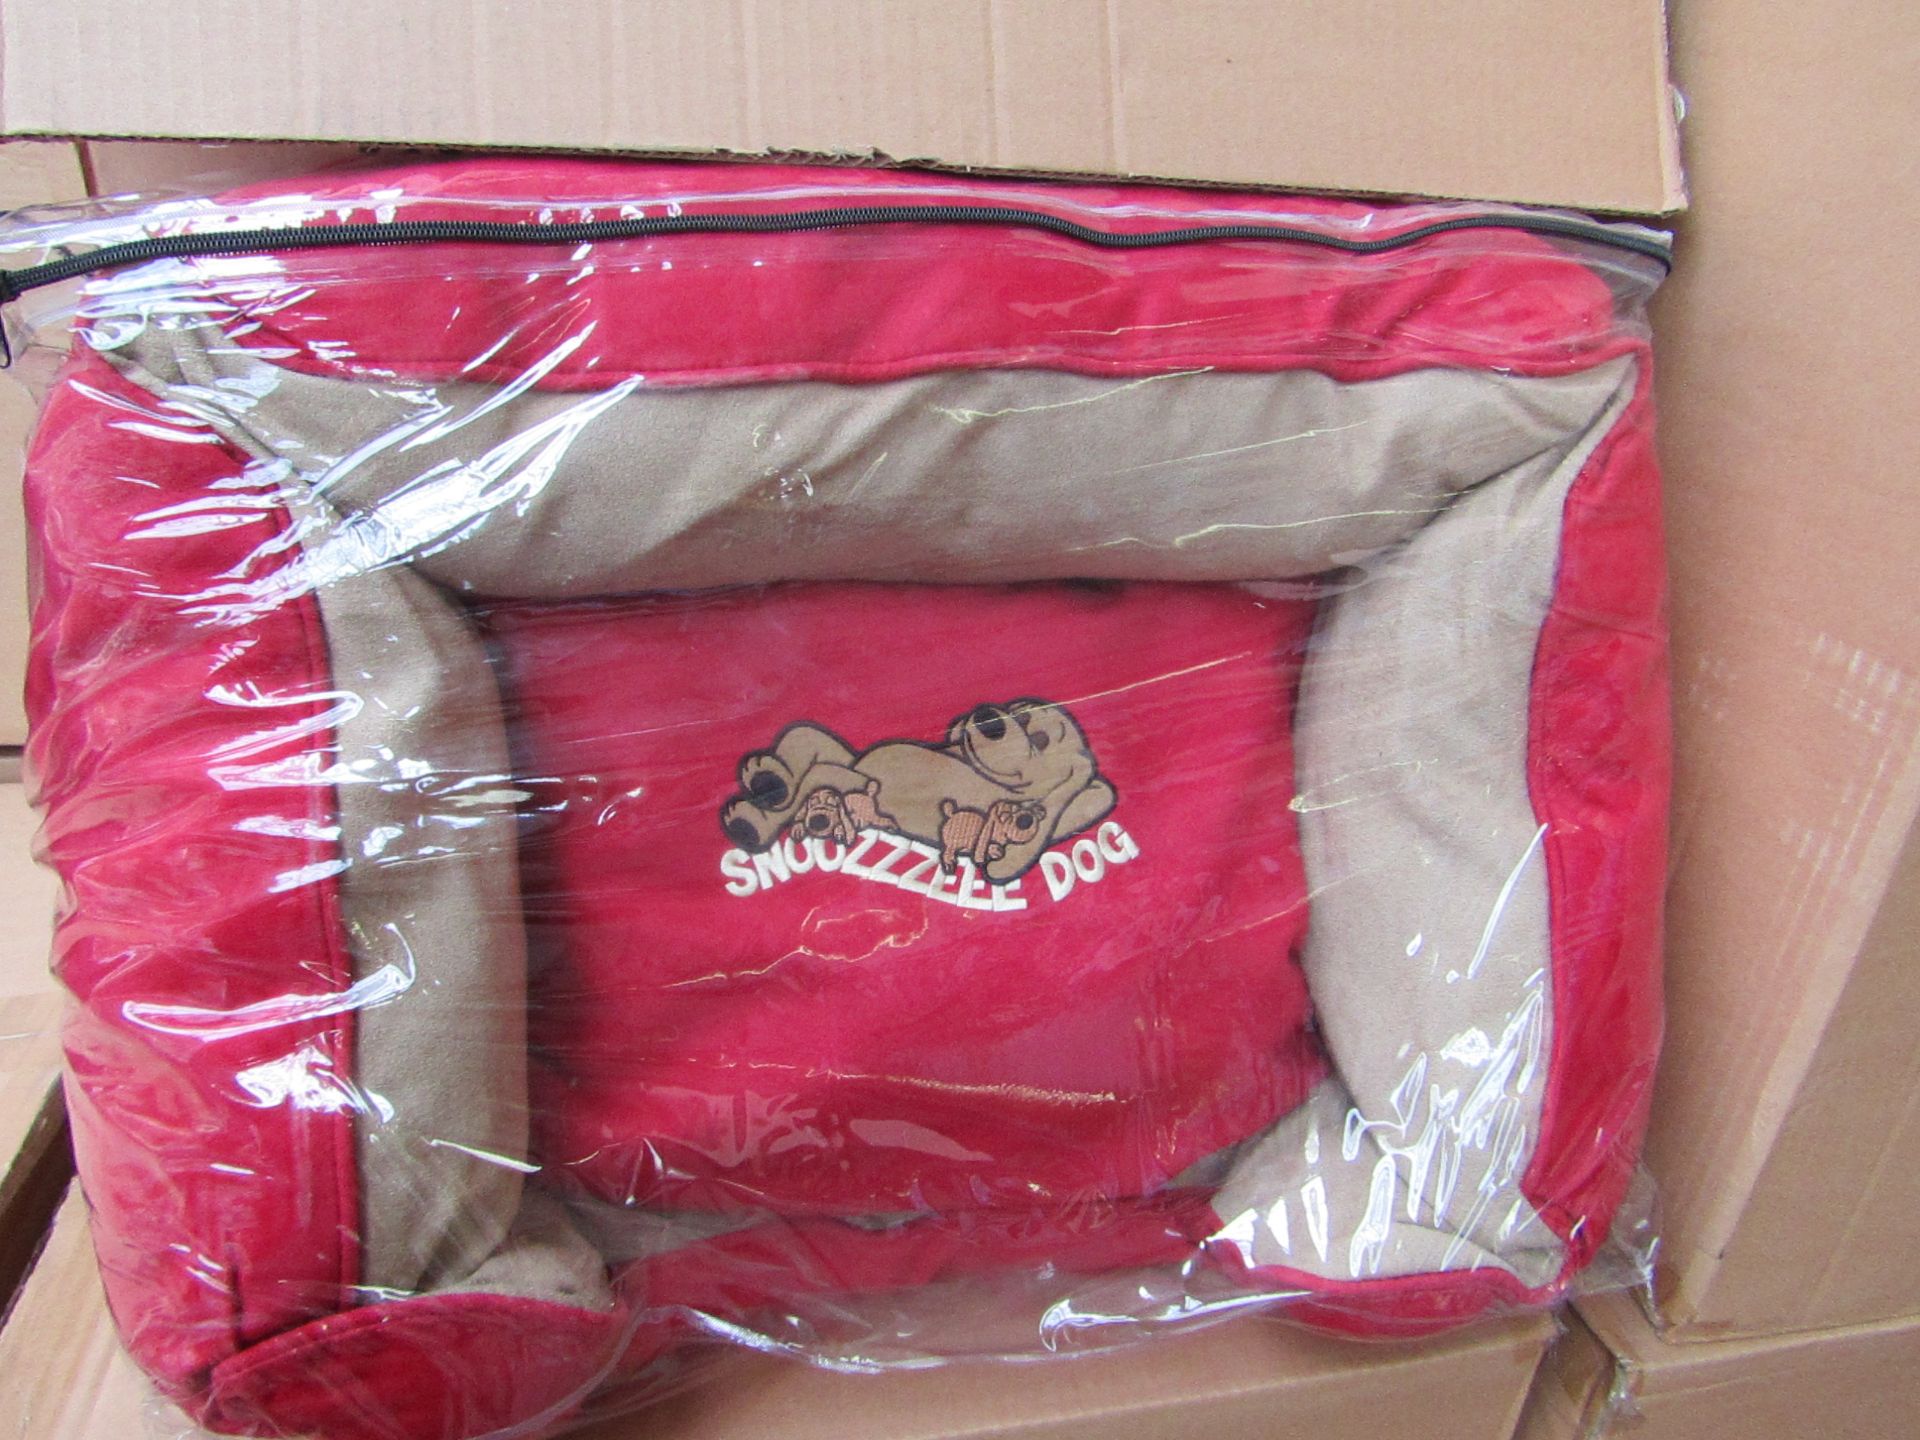 5x Snoozzzeee Dog - Cherry Red Sofa Dog Bed (23") - All New & Packaged.